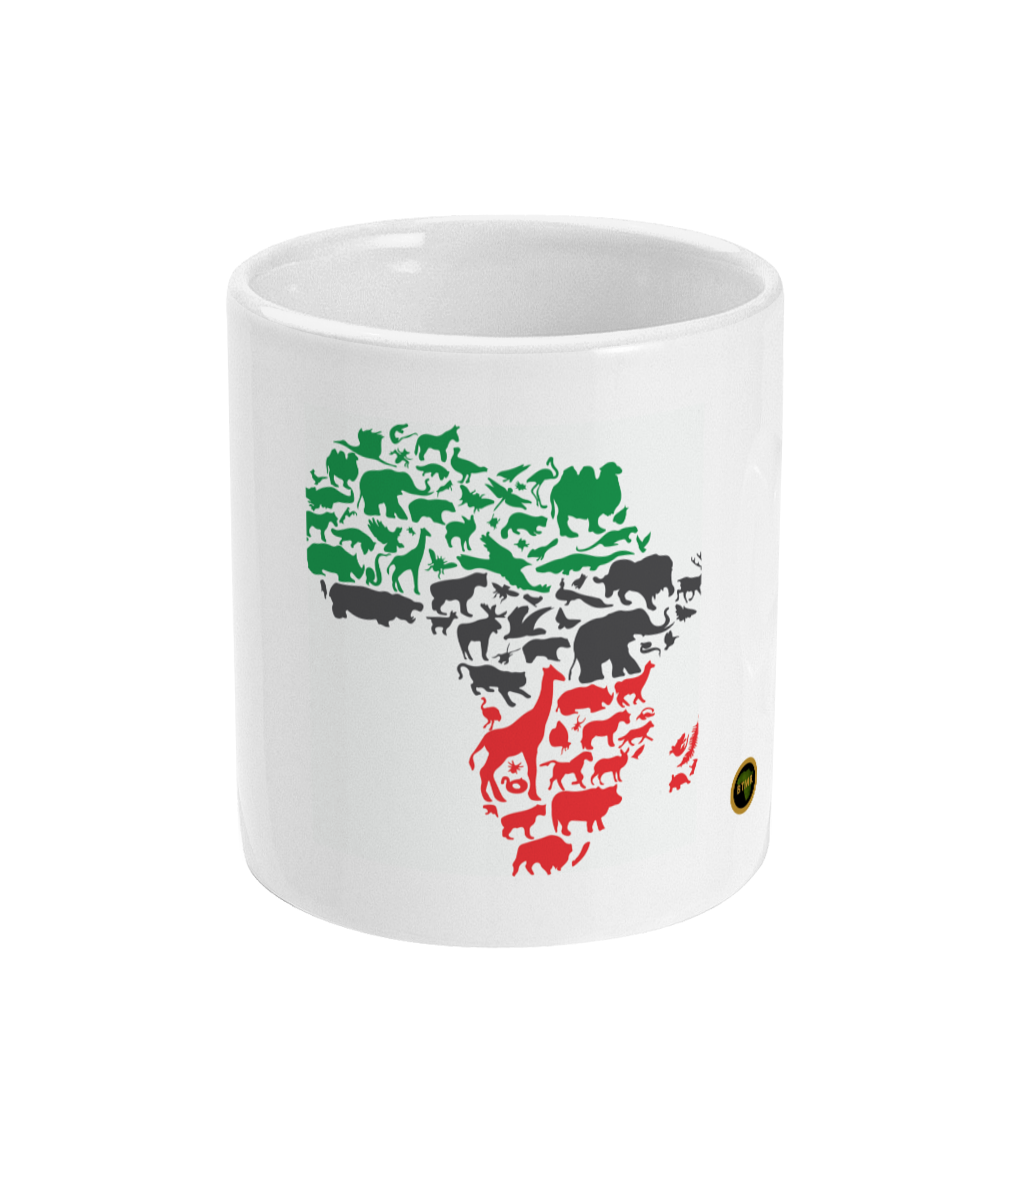 Animals of Africa Map Cup